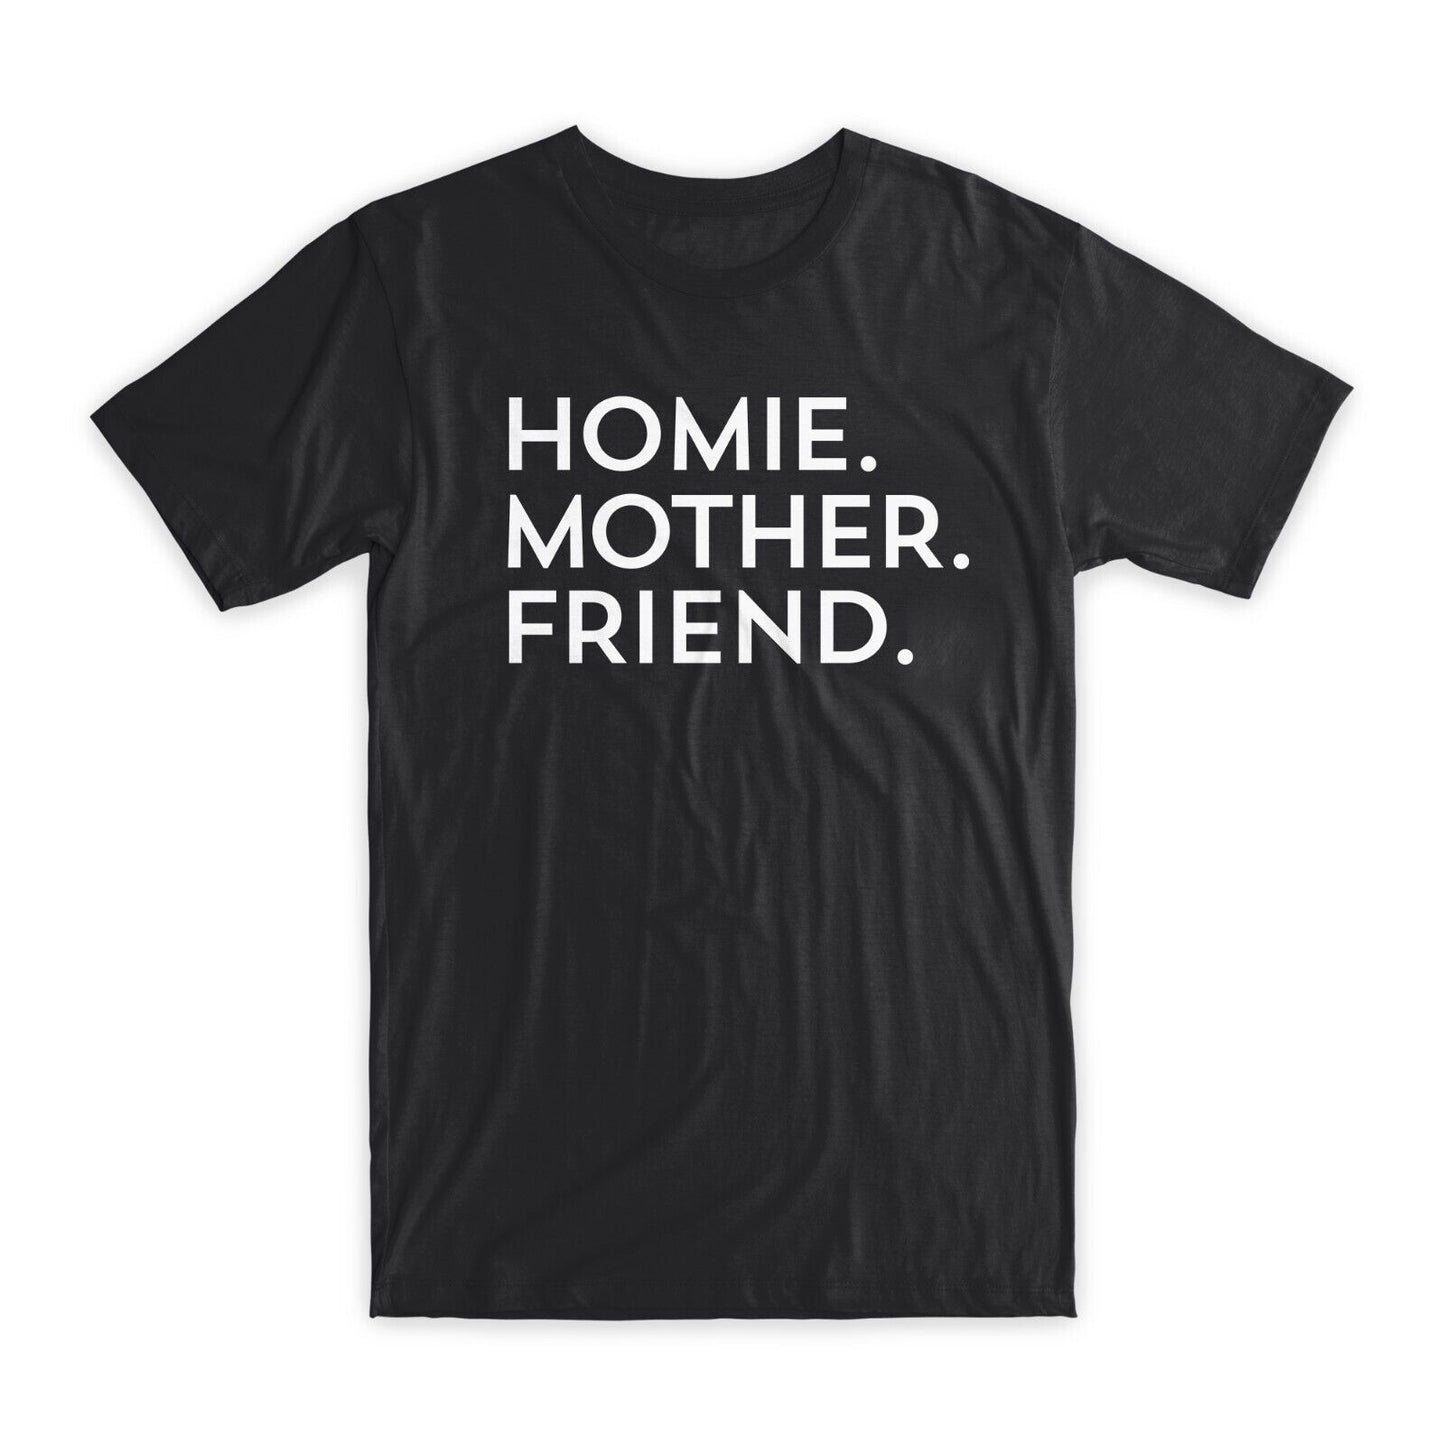 Homie Mother Friend T-Shirt Premium Soft Cotton Crew Neck Funny Tee Gifts NEW